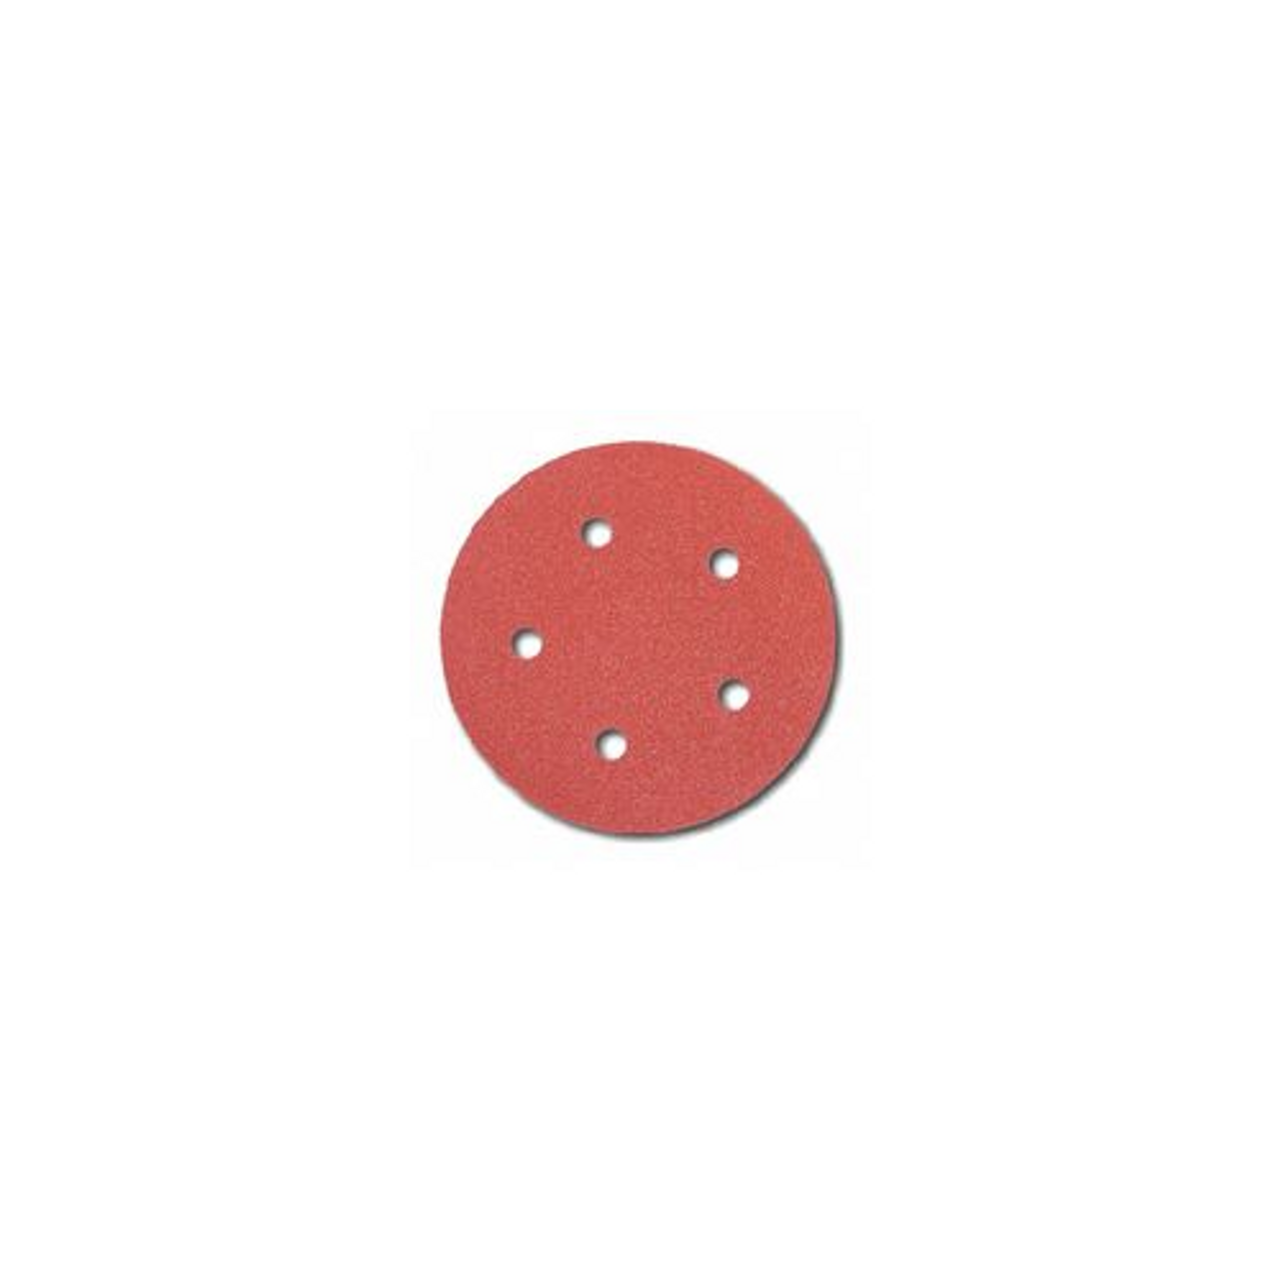 PORTER CABLE 735501225 5"" 120-Grit Hook and Loop 5-Hole Disc Sandpaper (25 Pack)